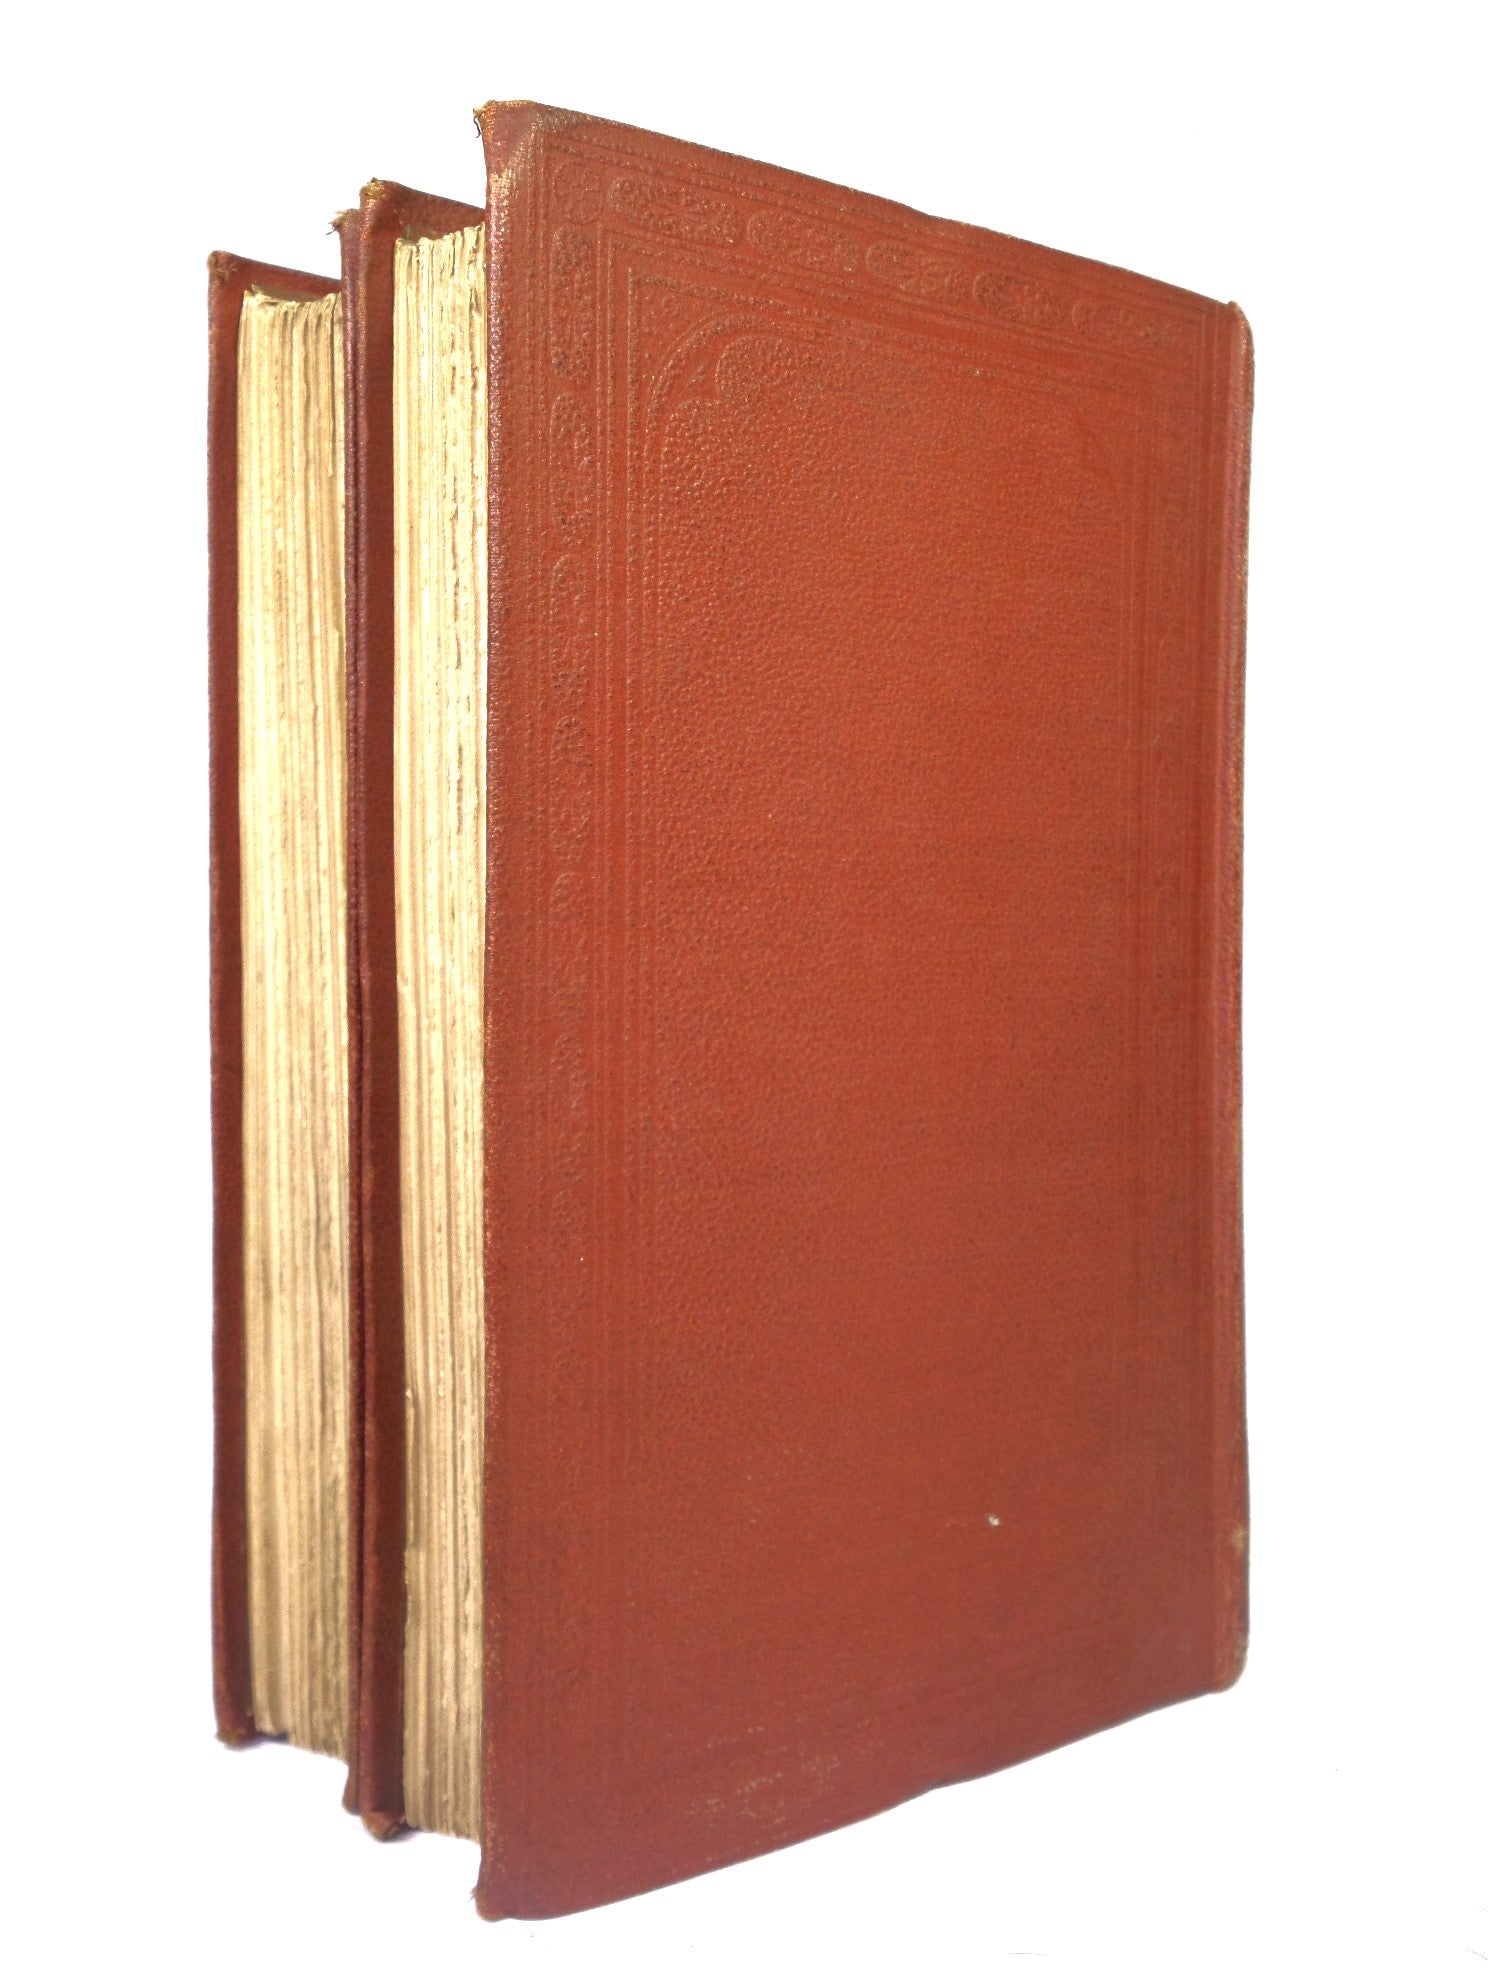 FIVE YEARS IN DAMASCUS BY J.L. PORTER 1855 FIRST EDITION